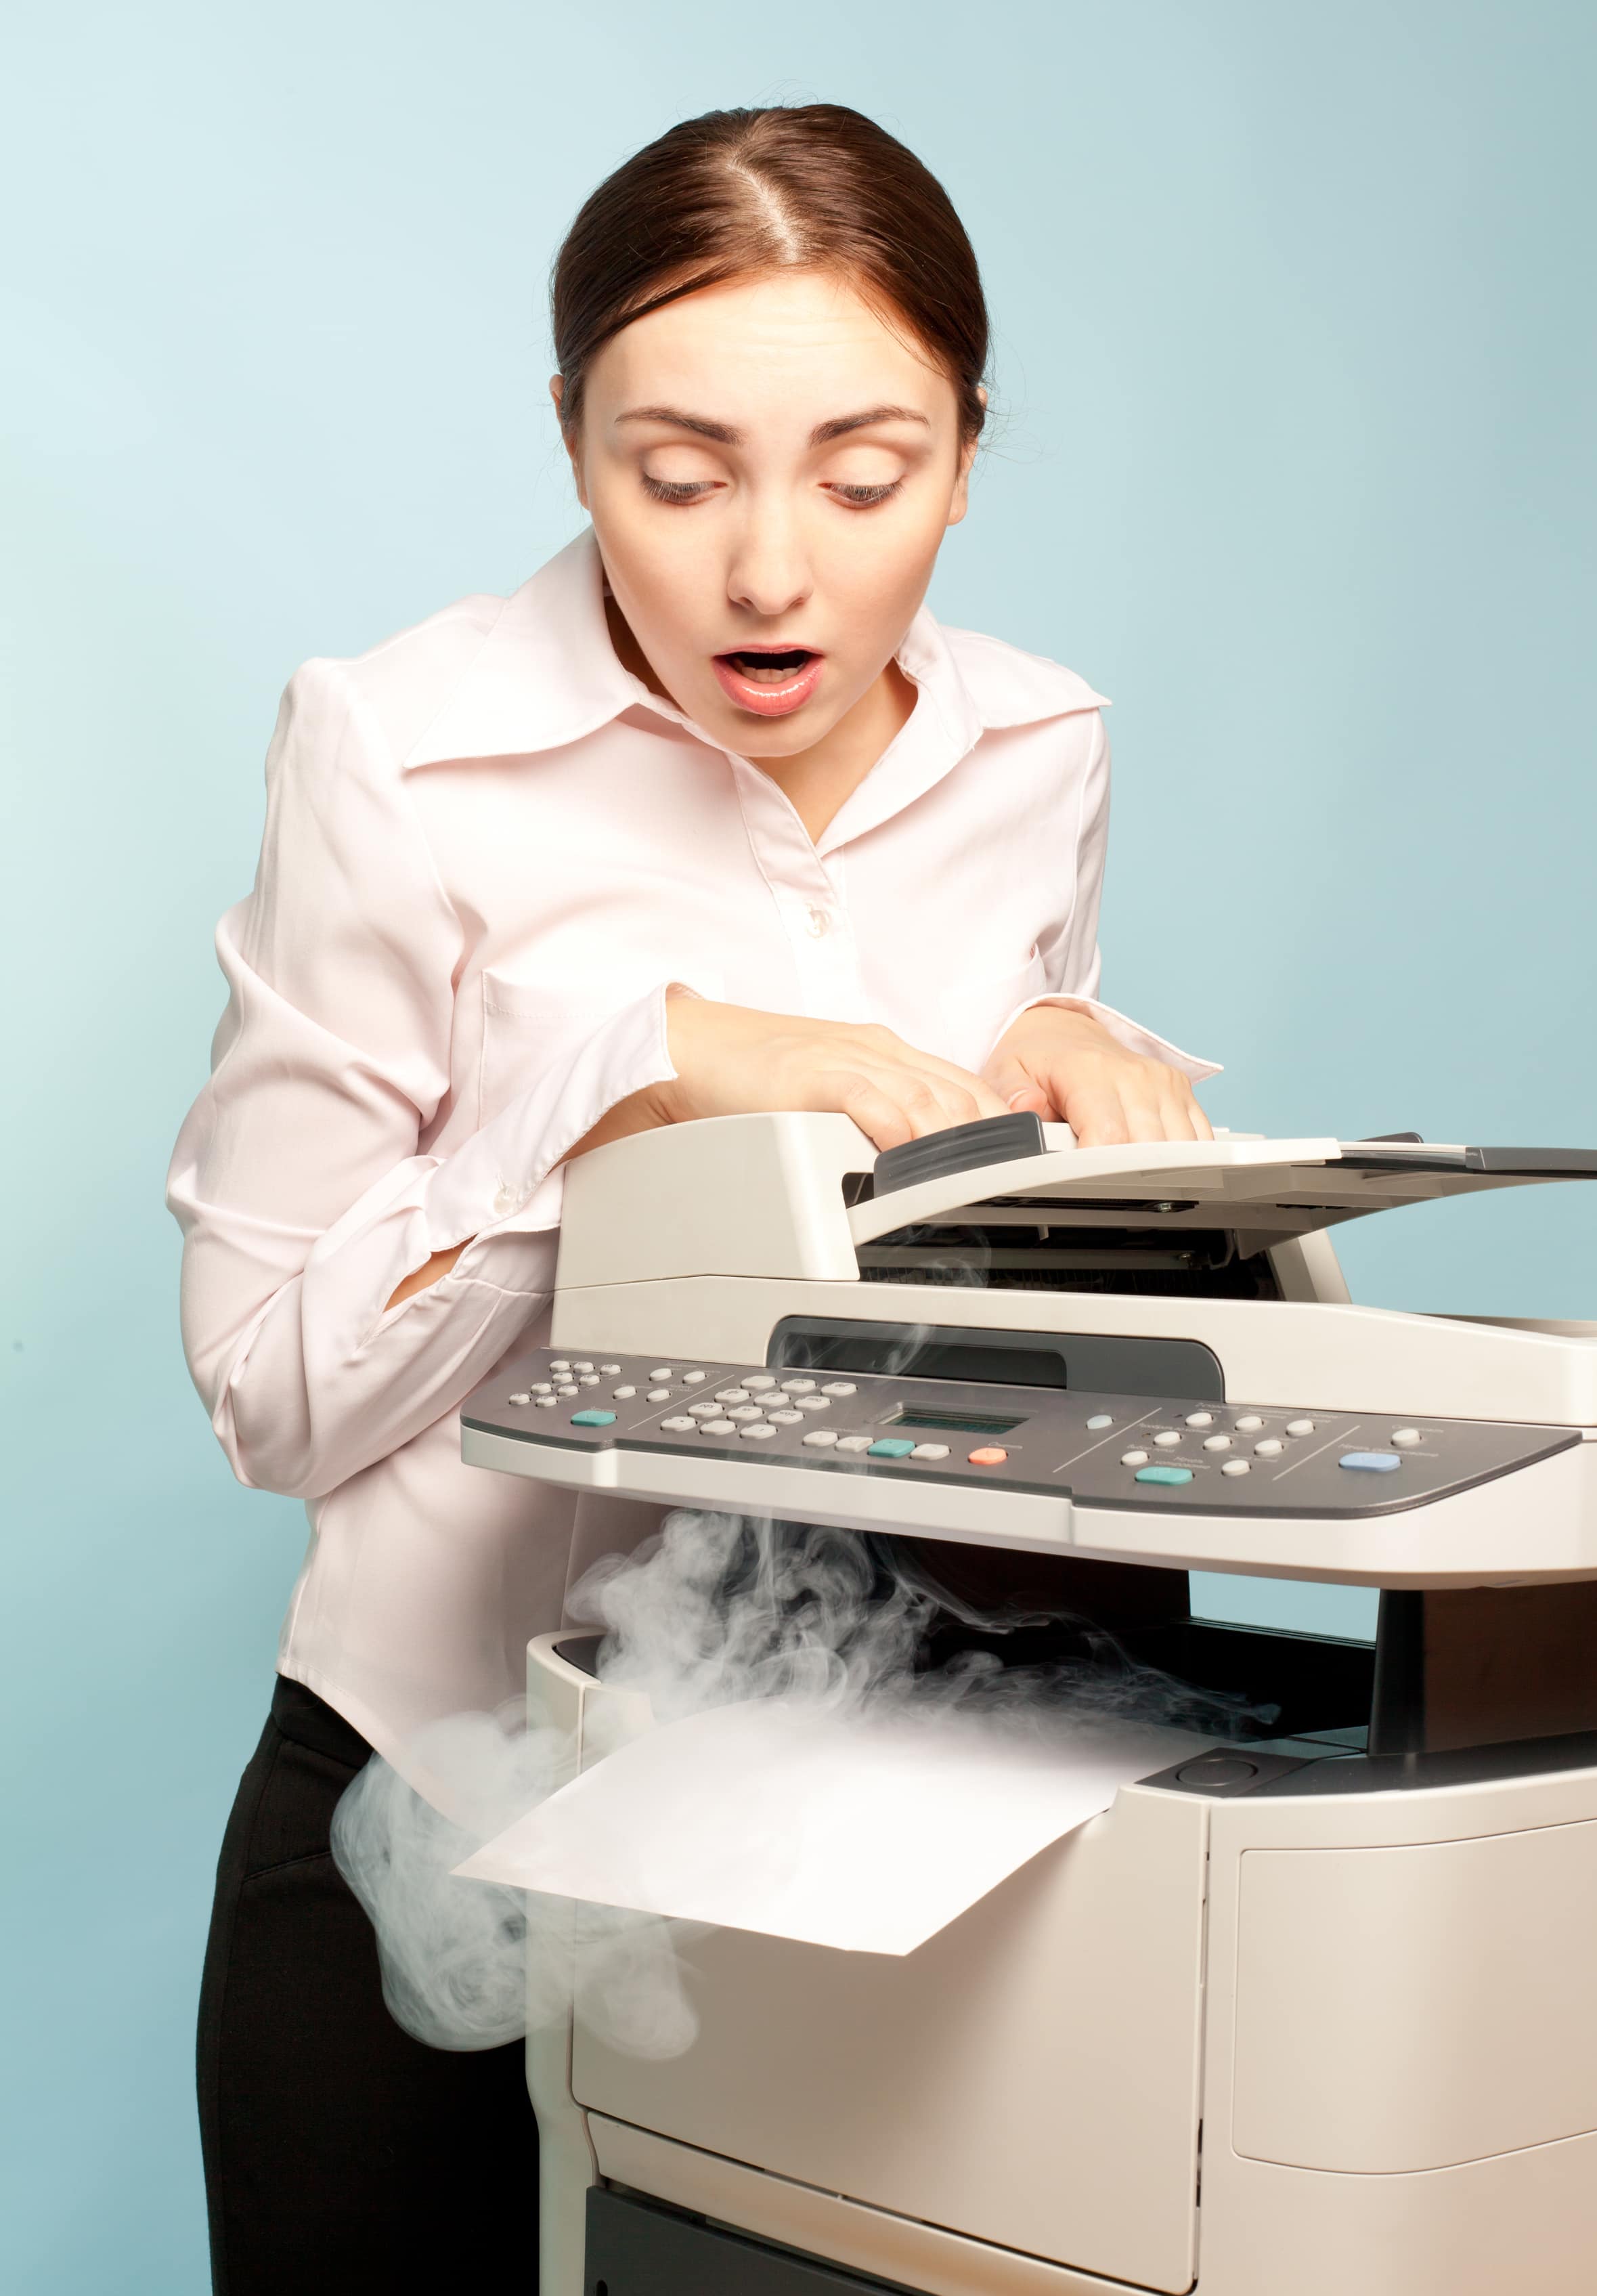 Why You Should Eliminate Your Office’s Fax Machine